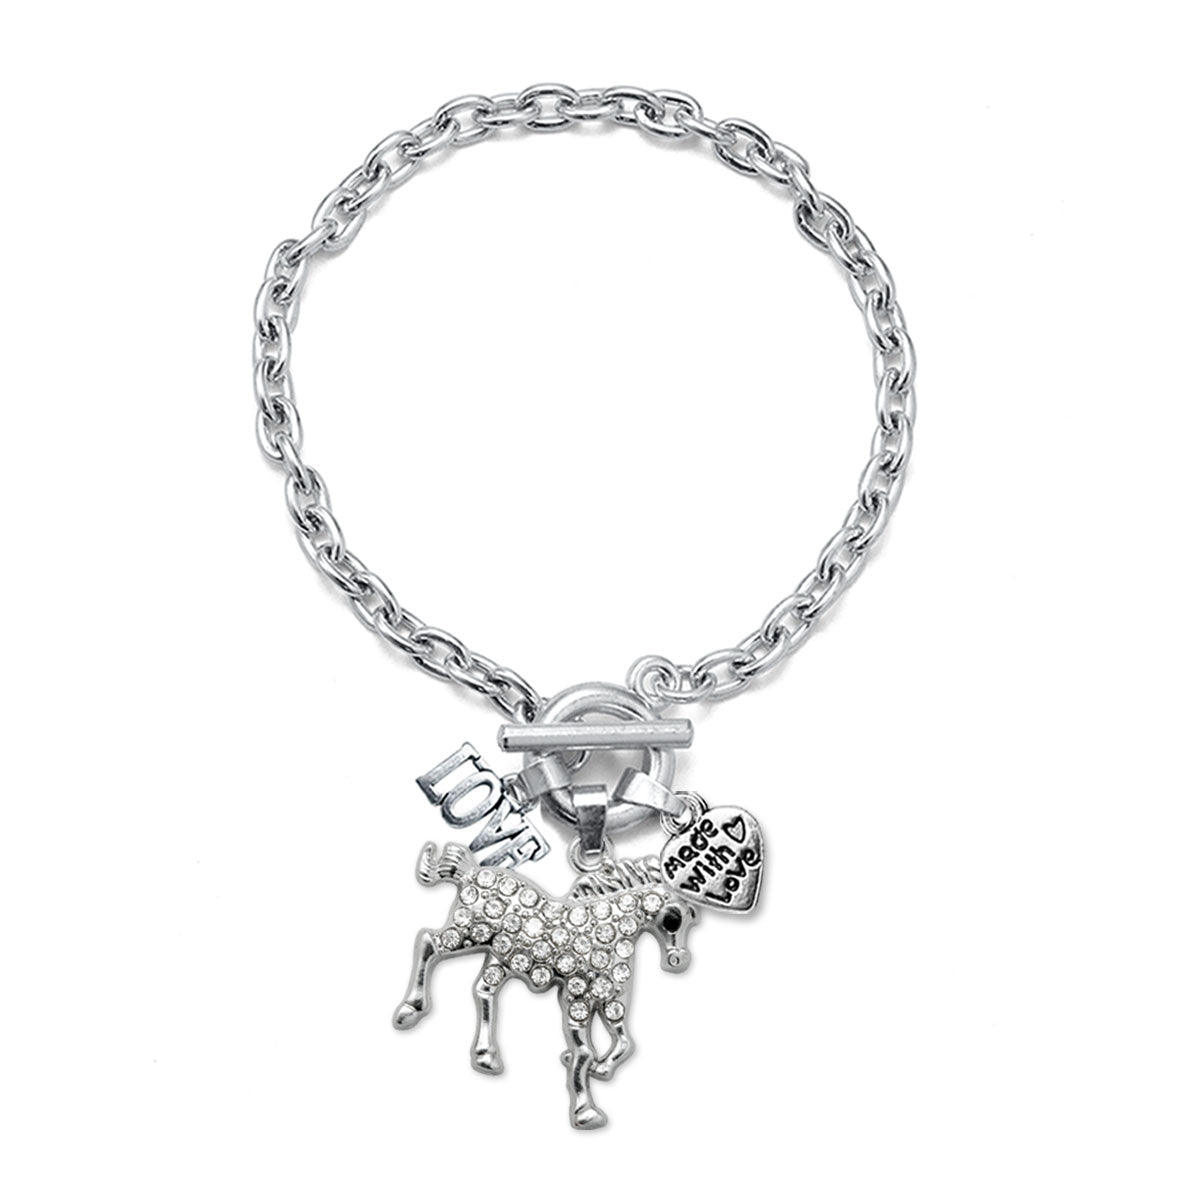 Silver Love Galloping Horse Charm Toggle Bracelet